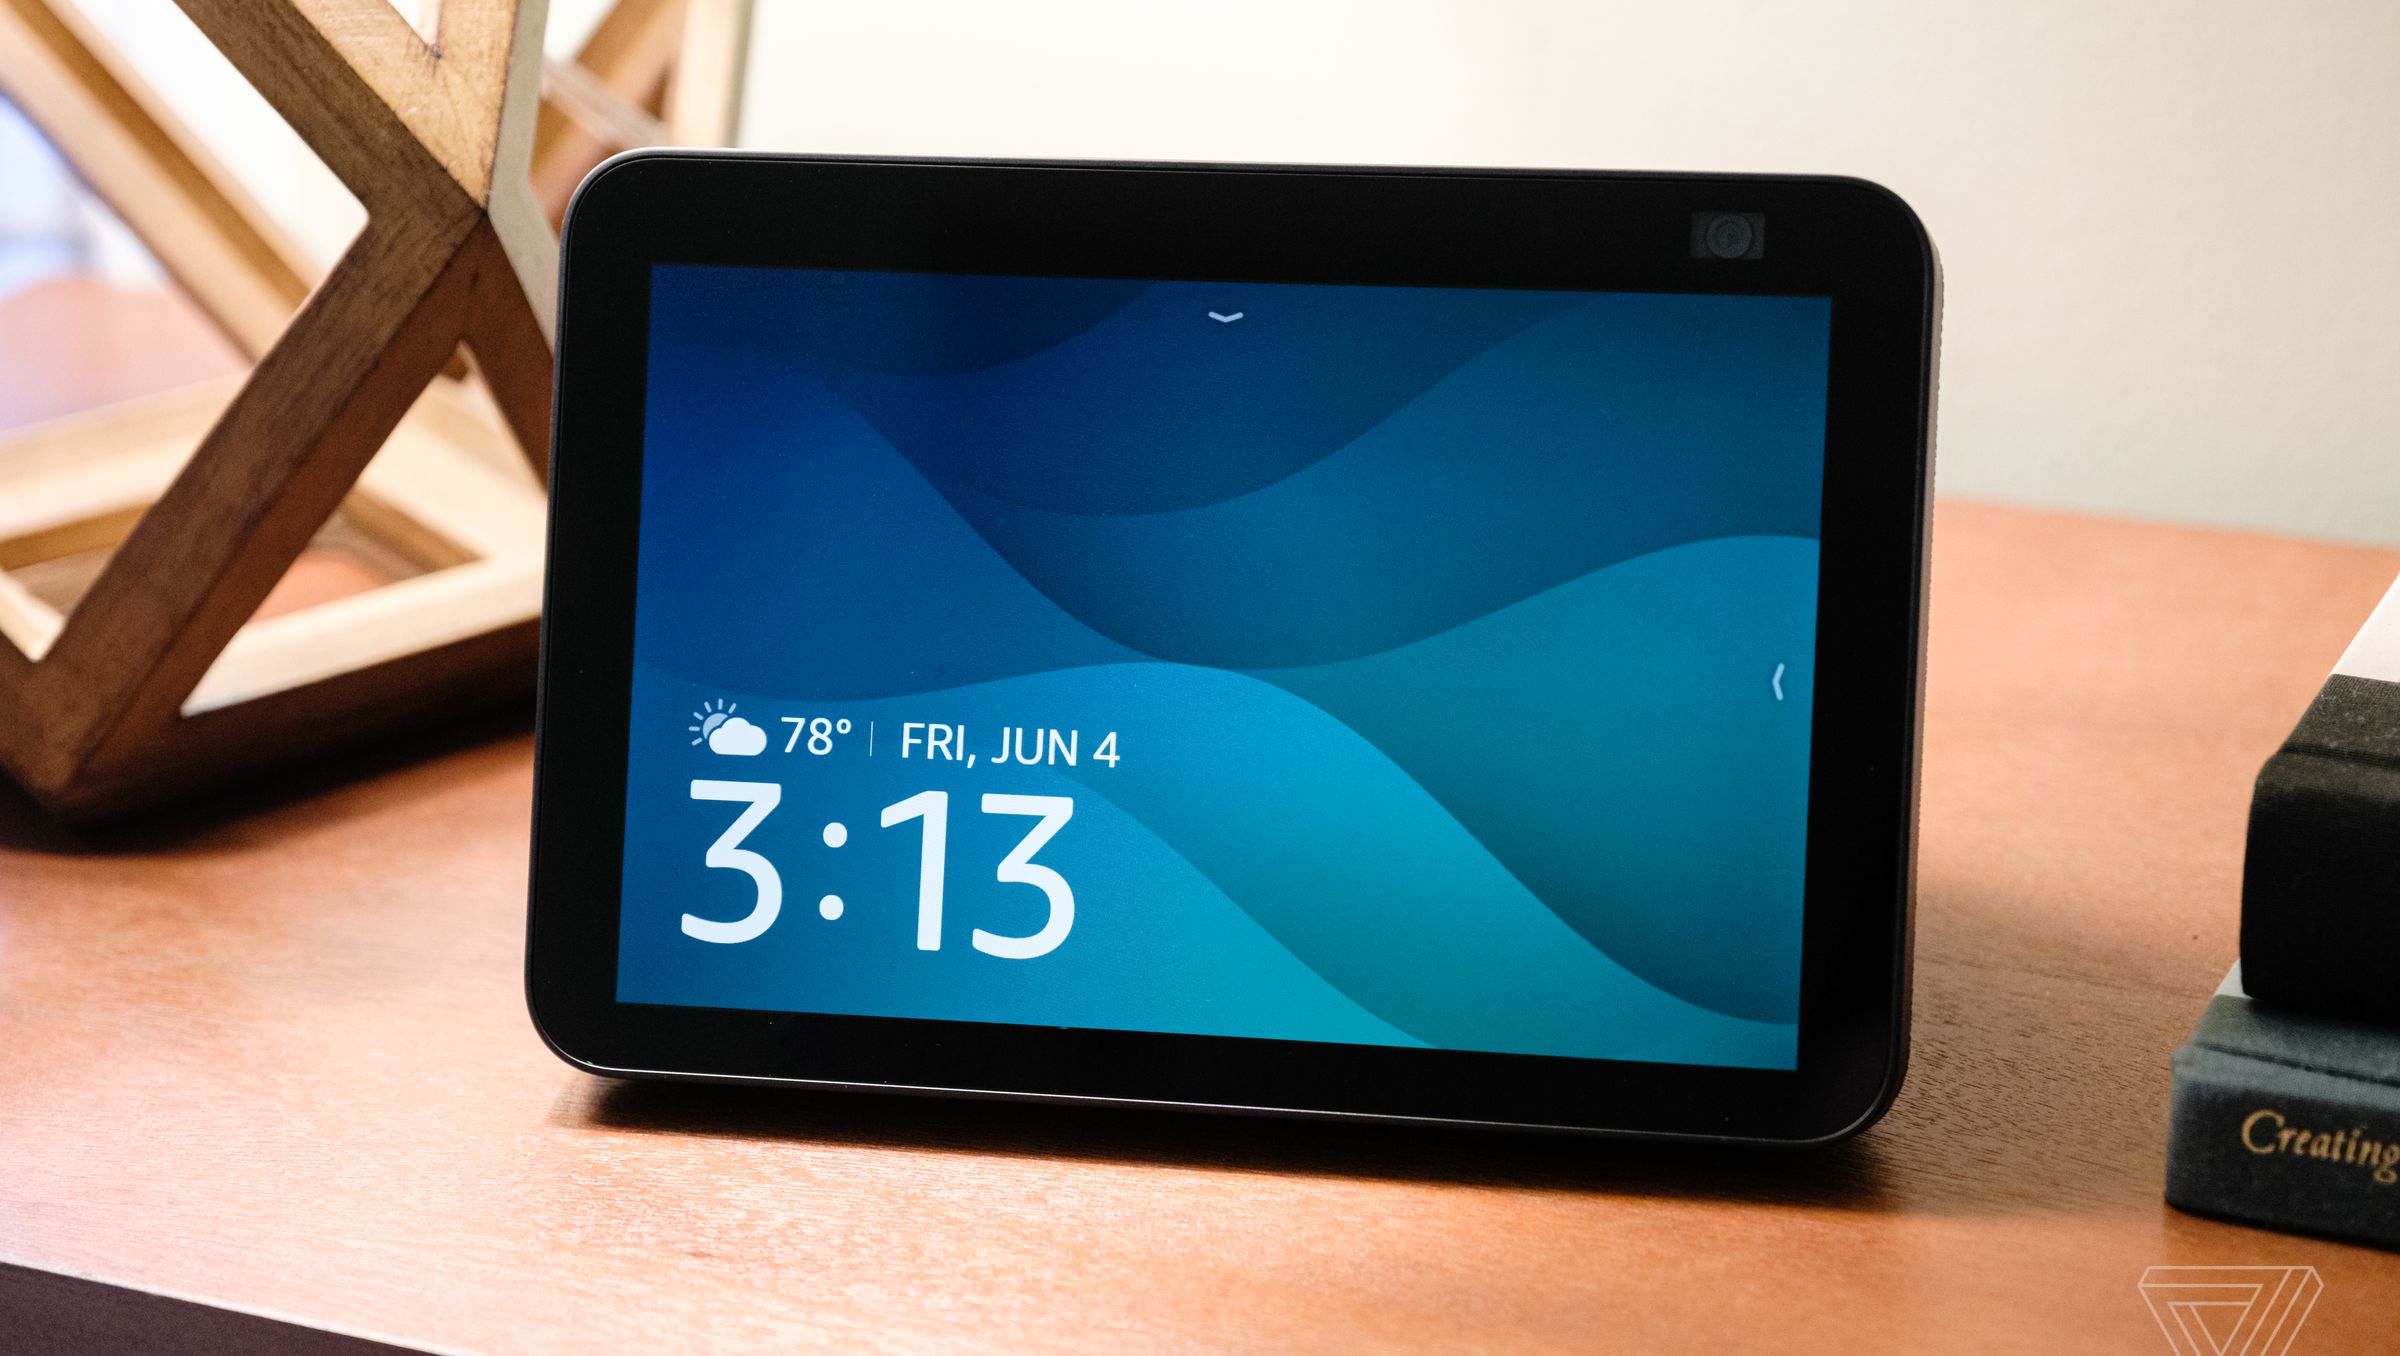 The second-generation Echo Show 8 with the main screen on display and resting on a table.